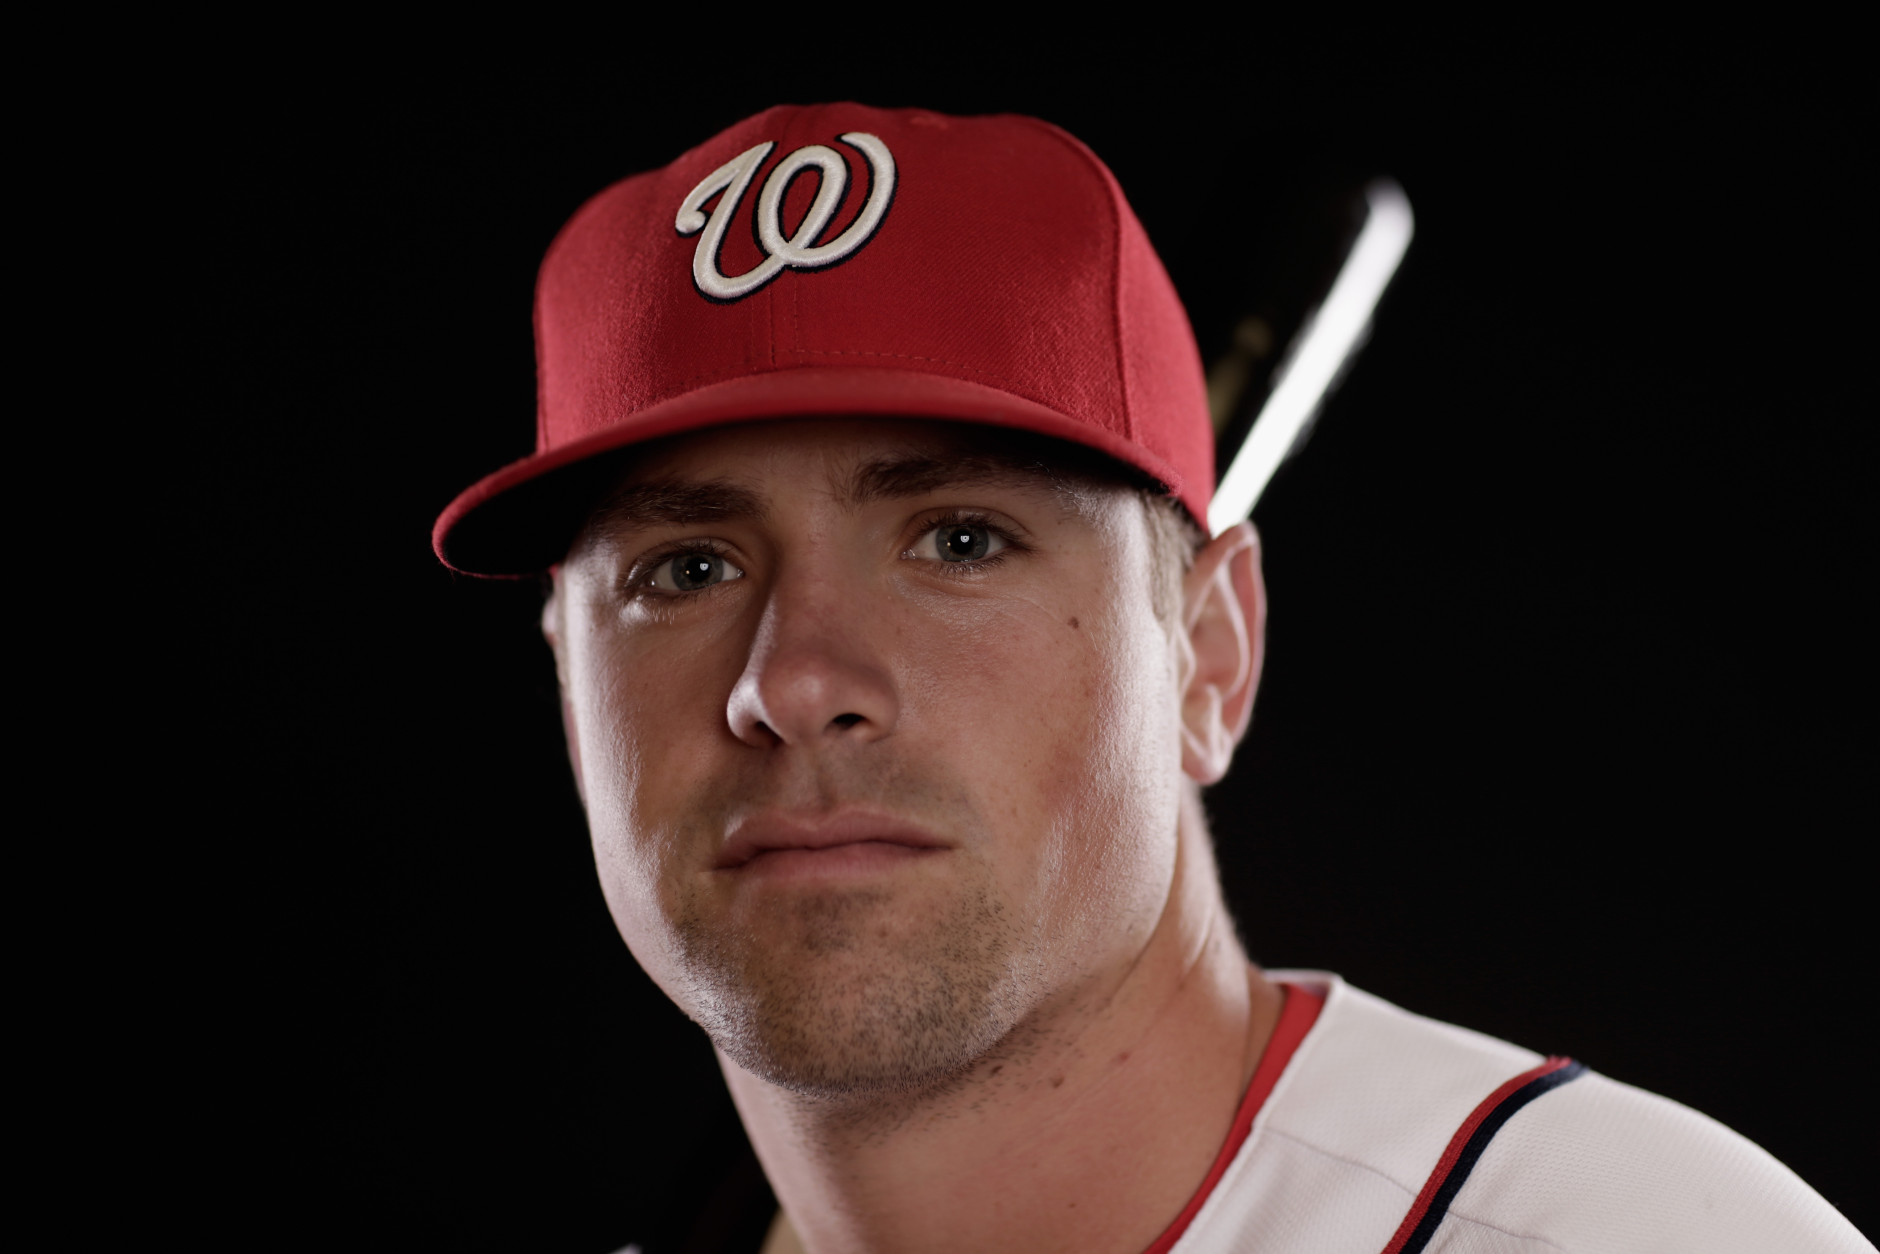 VIERA, FL - MARCH 01:  Tyler Moore #12 of the Washington Nationals poses for a portrait during photo day at Space Coast Stadium on March 1, 2015 in Viera, Florida.  (Photo by Chris Trotman/Getty Images)